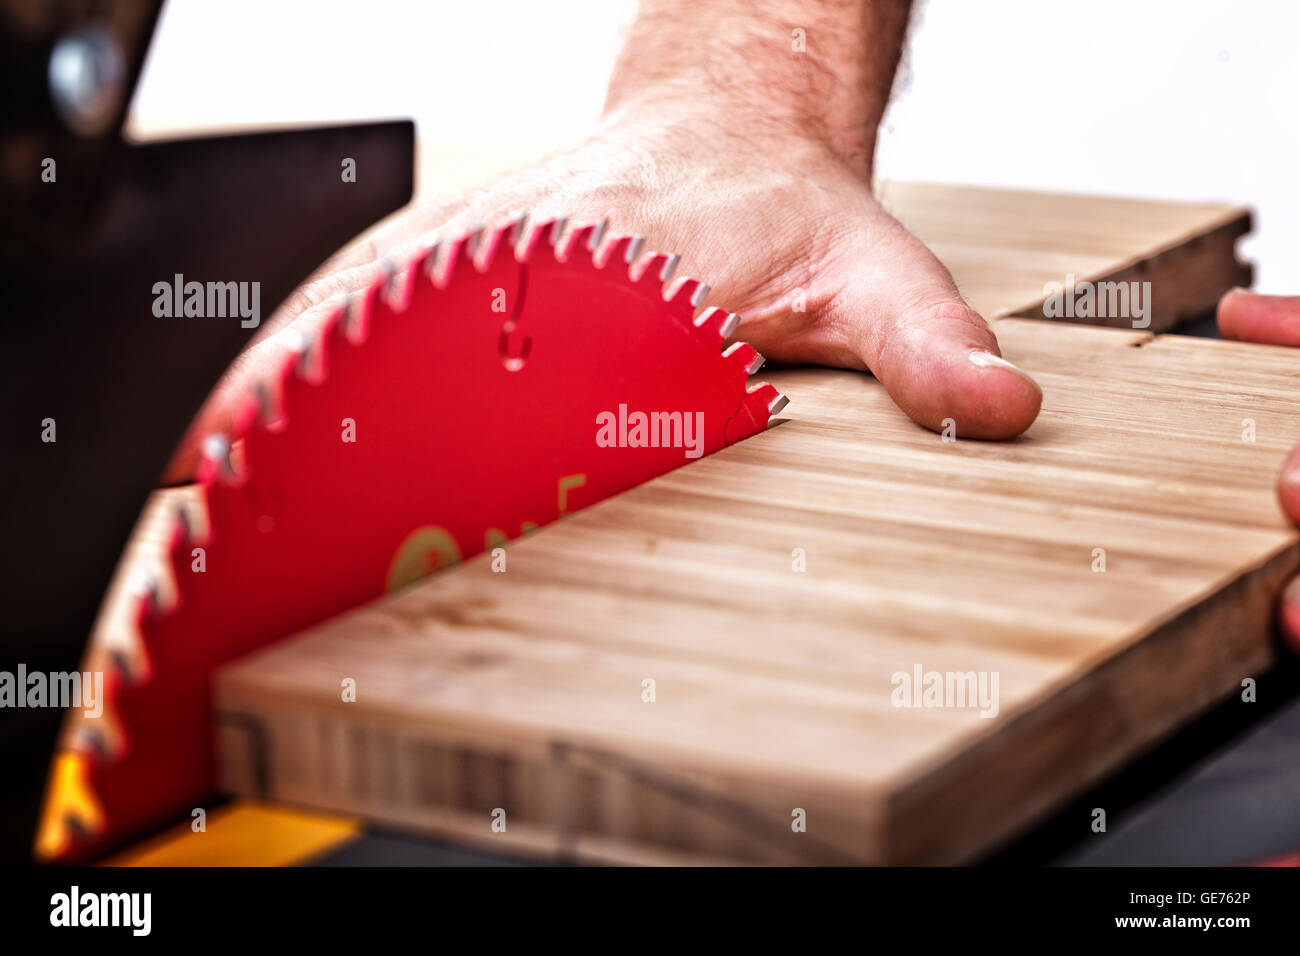 detail of table saw blade and human hand in dangerous position Stock Photo